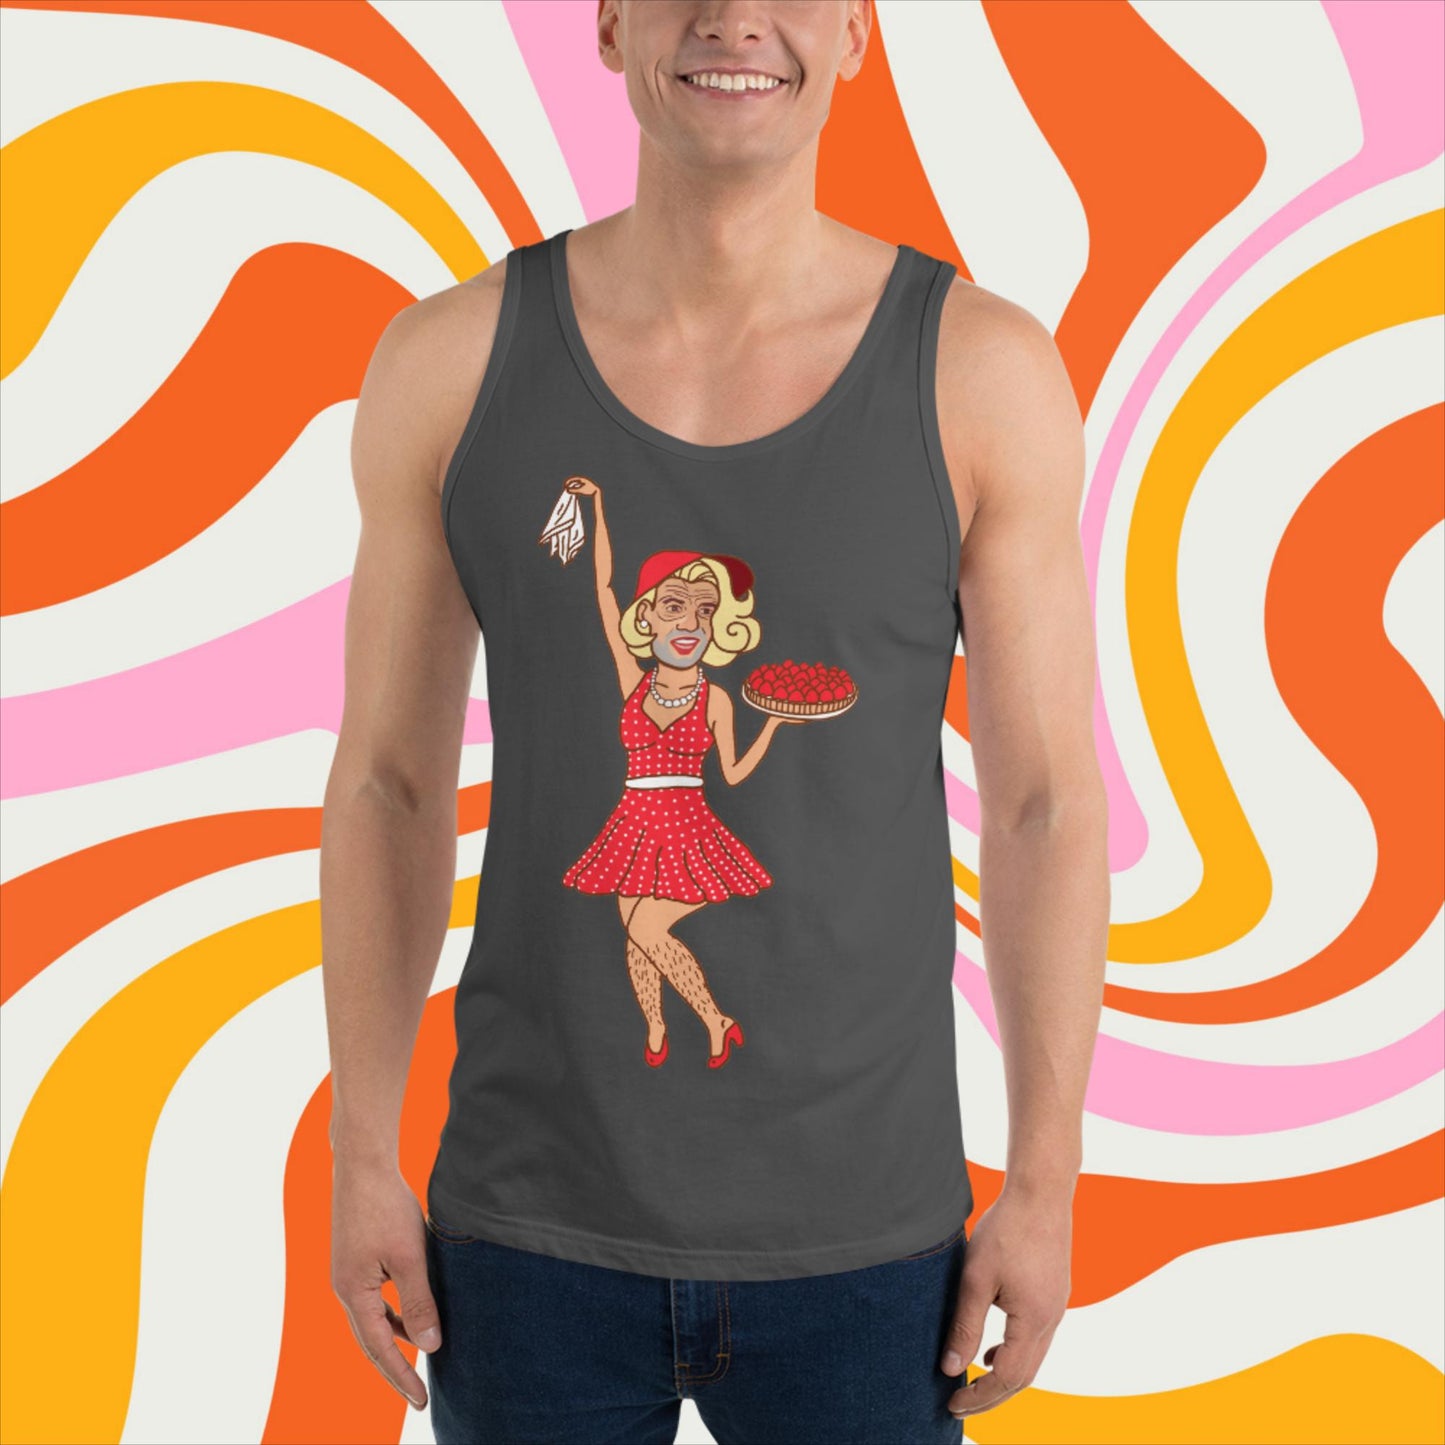 Thinnn Boy Bake Club The Fighter and The Kid TFATK Podcast Comedy 60s retro housewife Bryan Callen Tank Top Next Cult Brand